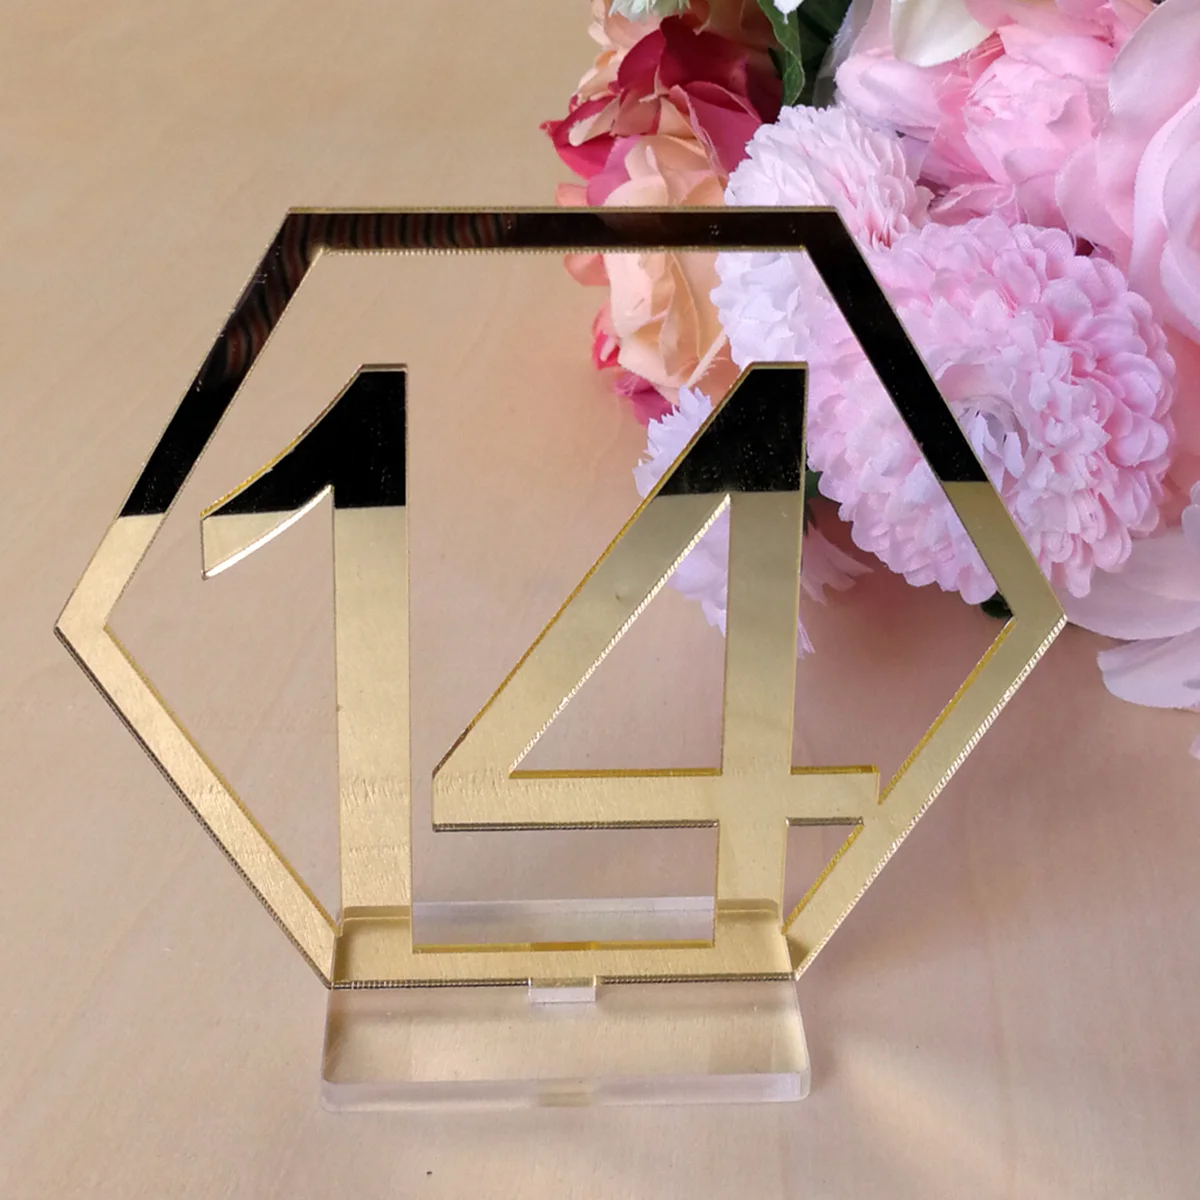 

1-20 Wedding Table Numbers Acrylic Mirror Silver Numbers Placeholders Table Stands Cards Numbers Plate Decors for Wedding Party